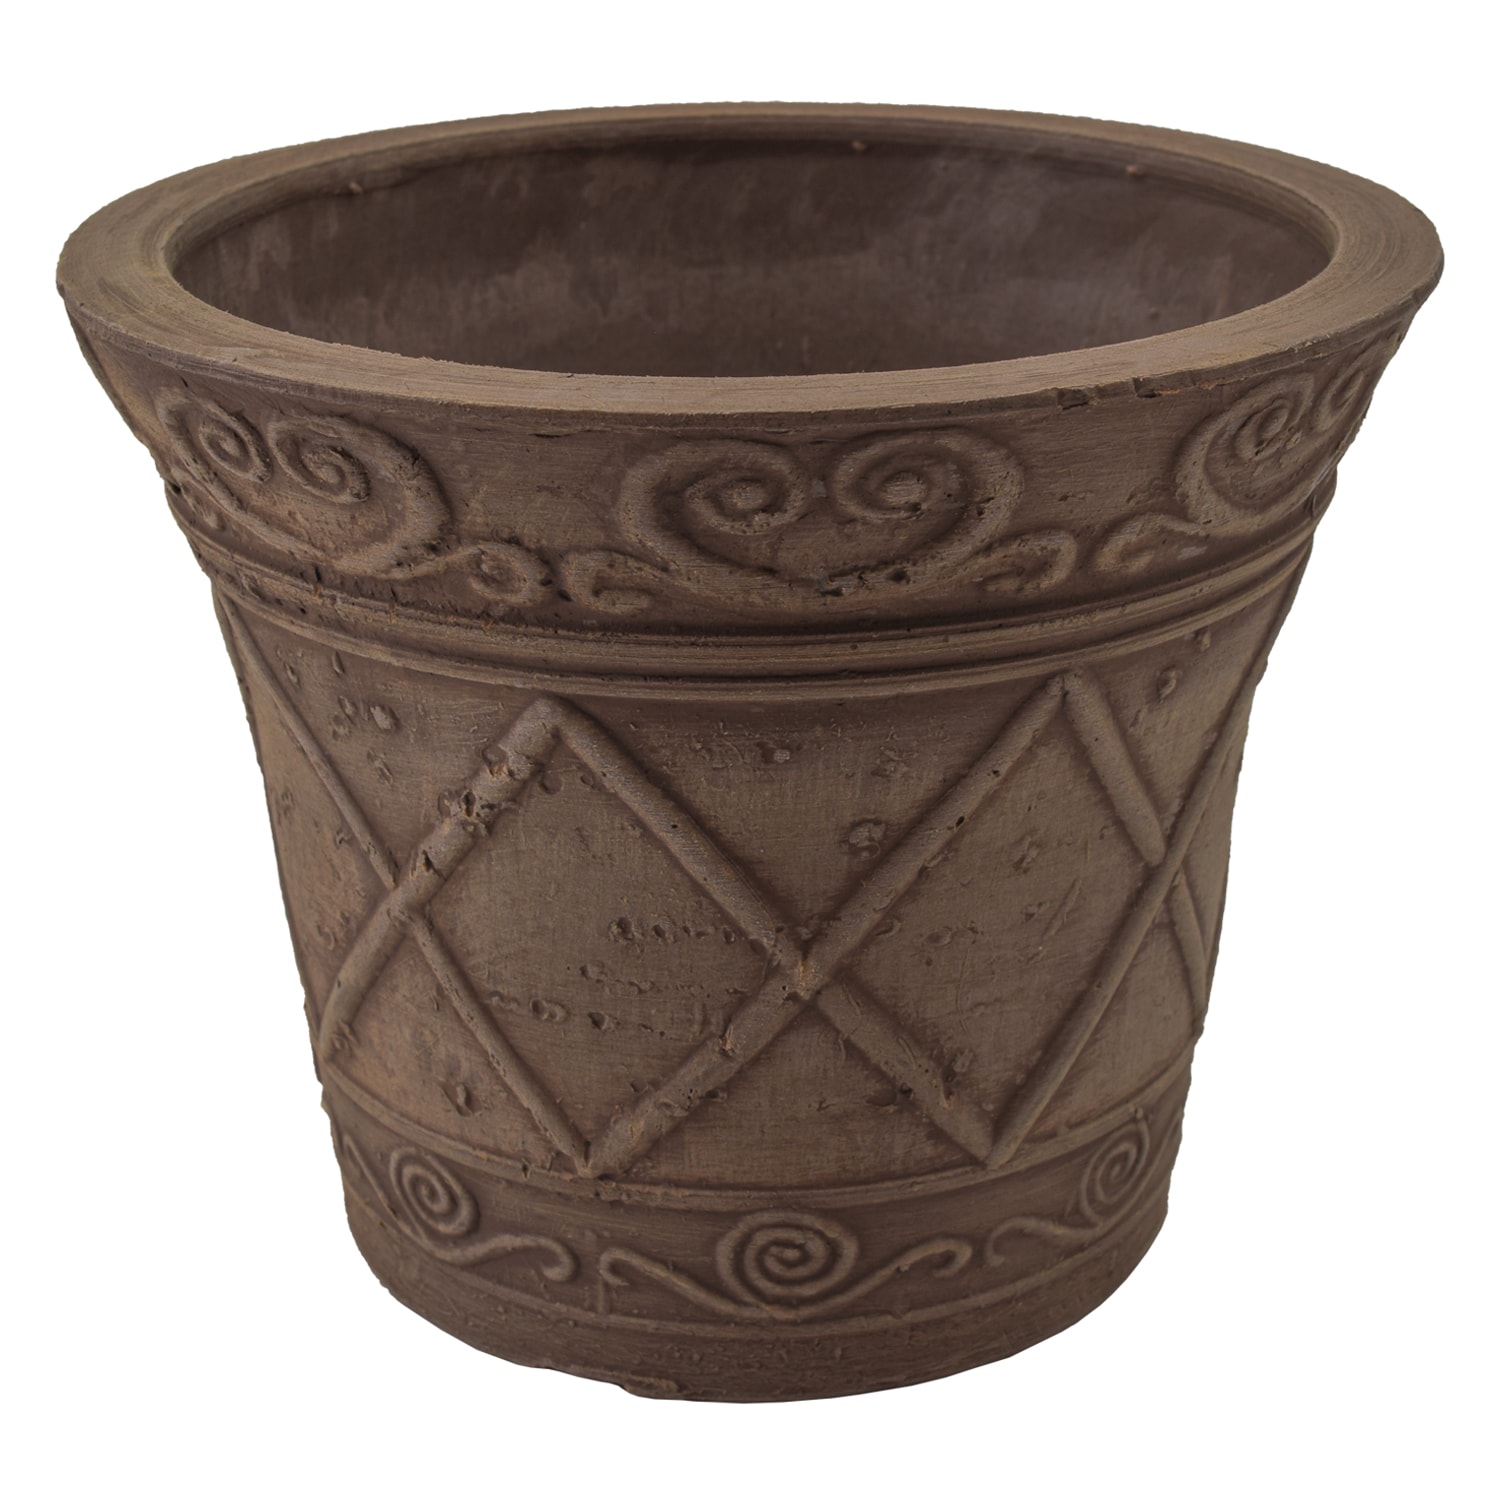 Arcadia Garden Products 5-in W x 4-in H Brown Plastic Planter in the ...